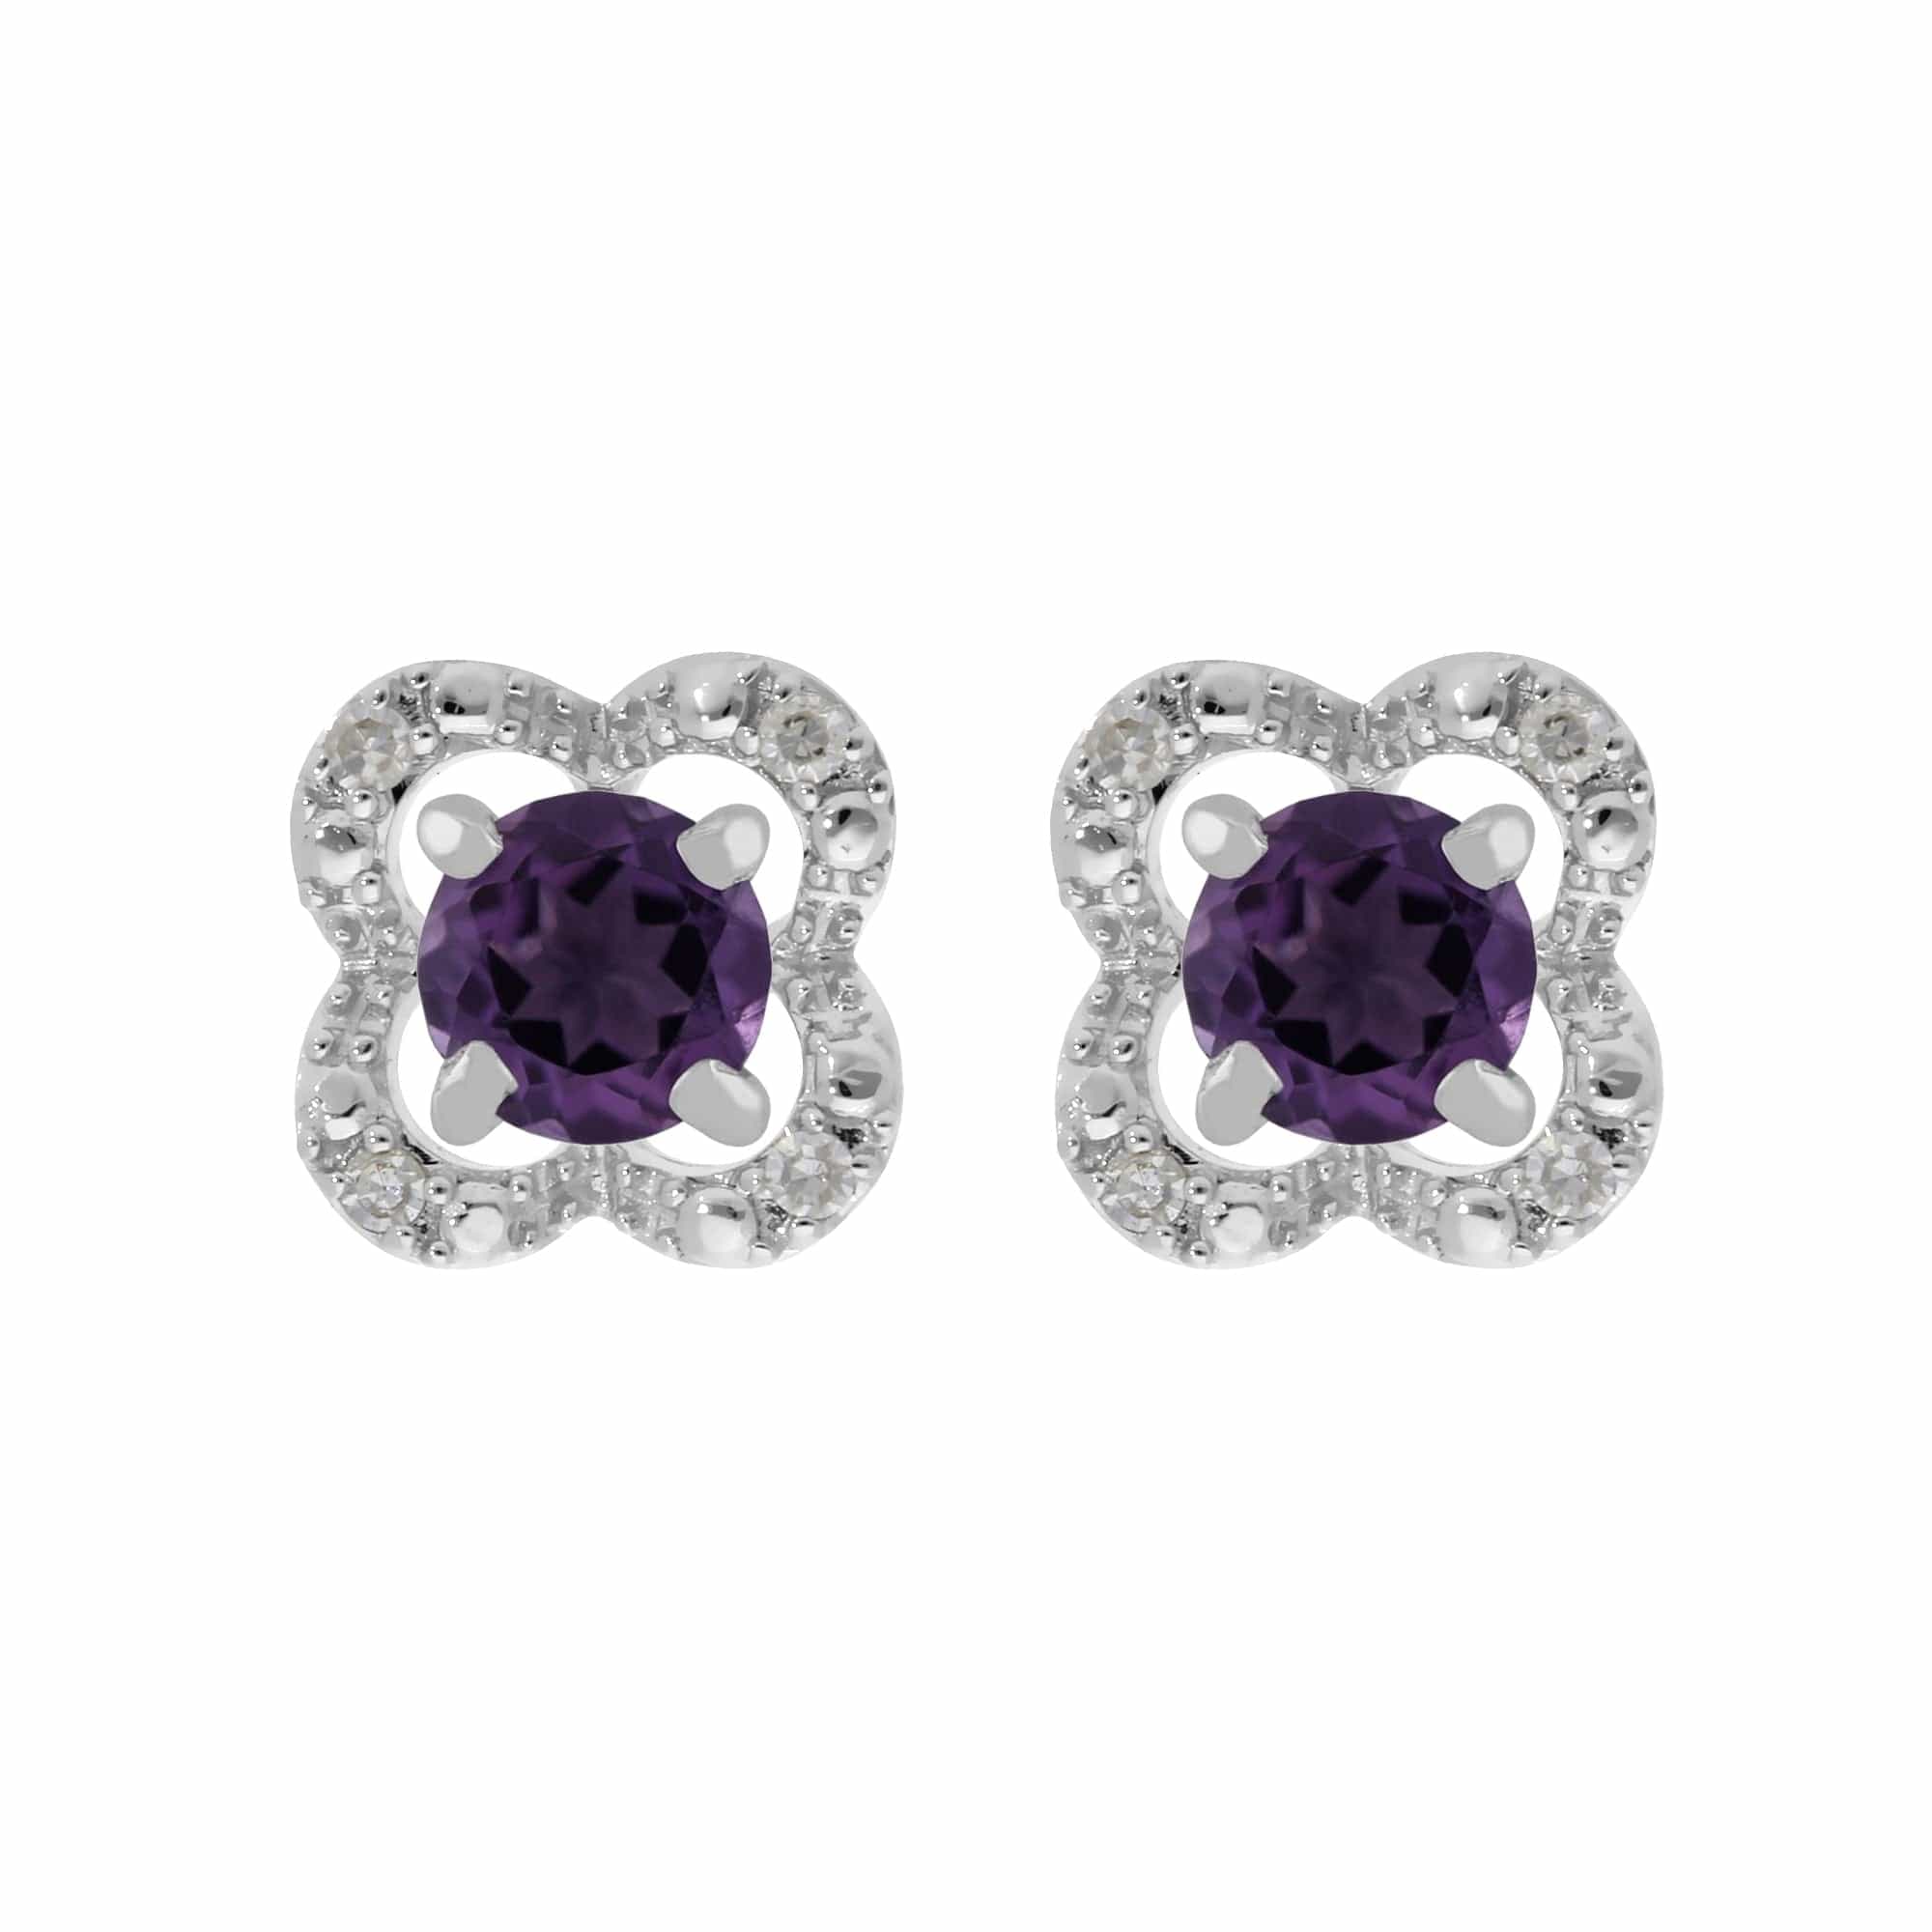 11612-162E0244019 Classic Round Amethyst Stud Earrings with Detachable Diamond Flower Ear Jacket in 9ct White Gold 1